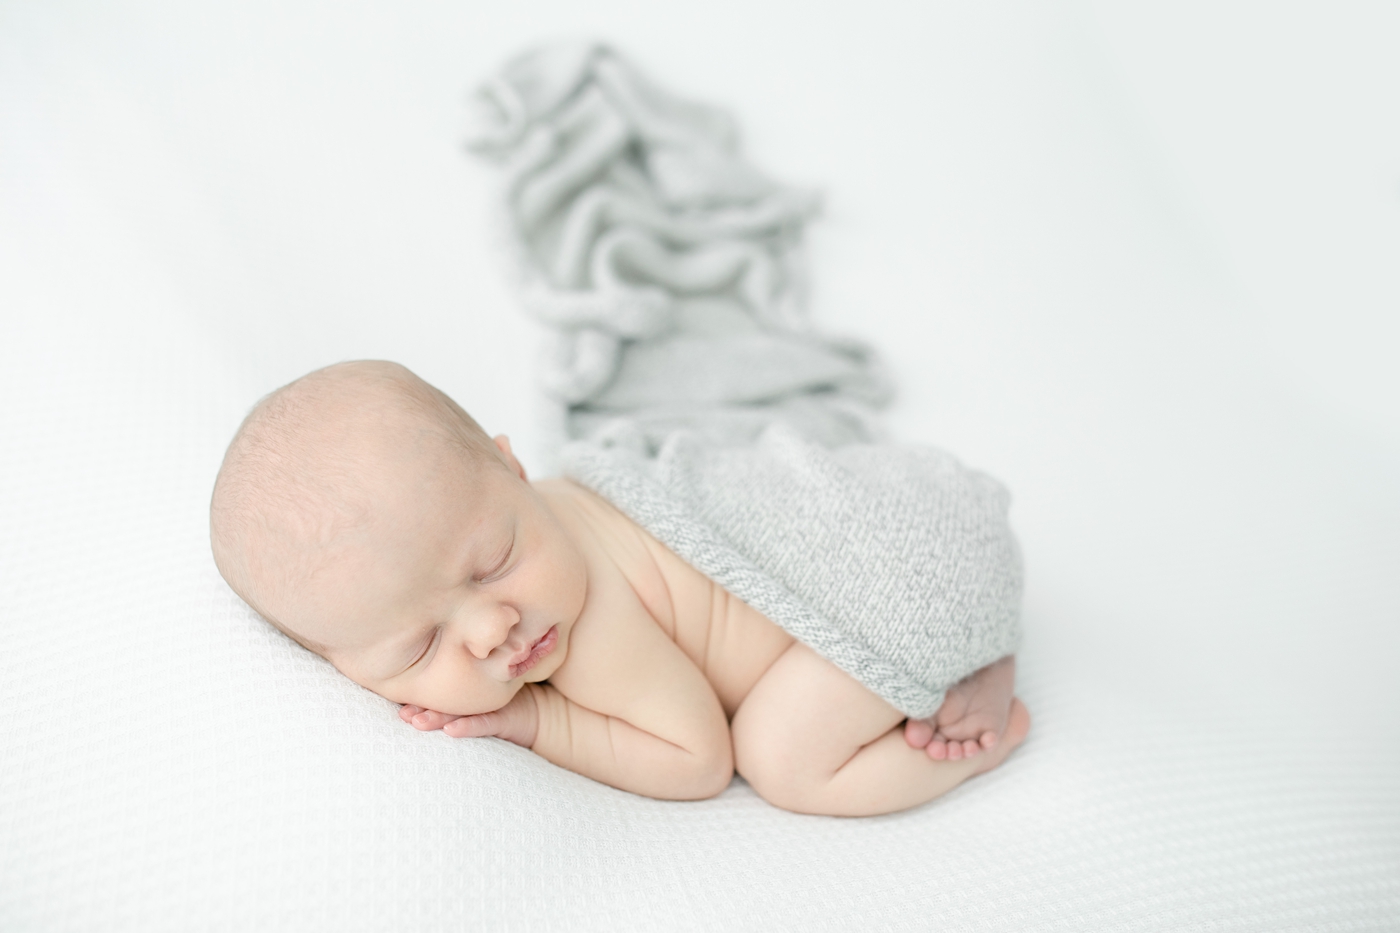 Baby posed with white backdrop and grey knit swaddle by Gulf Shores MS newborn photographer, Little Sunshine Photography.